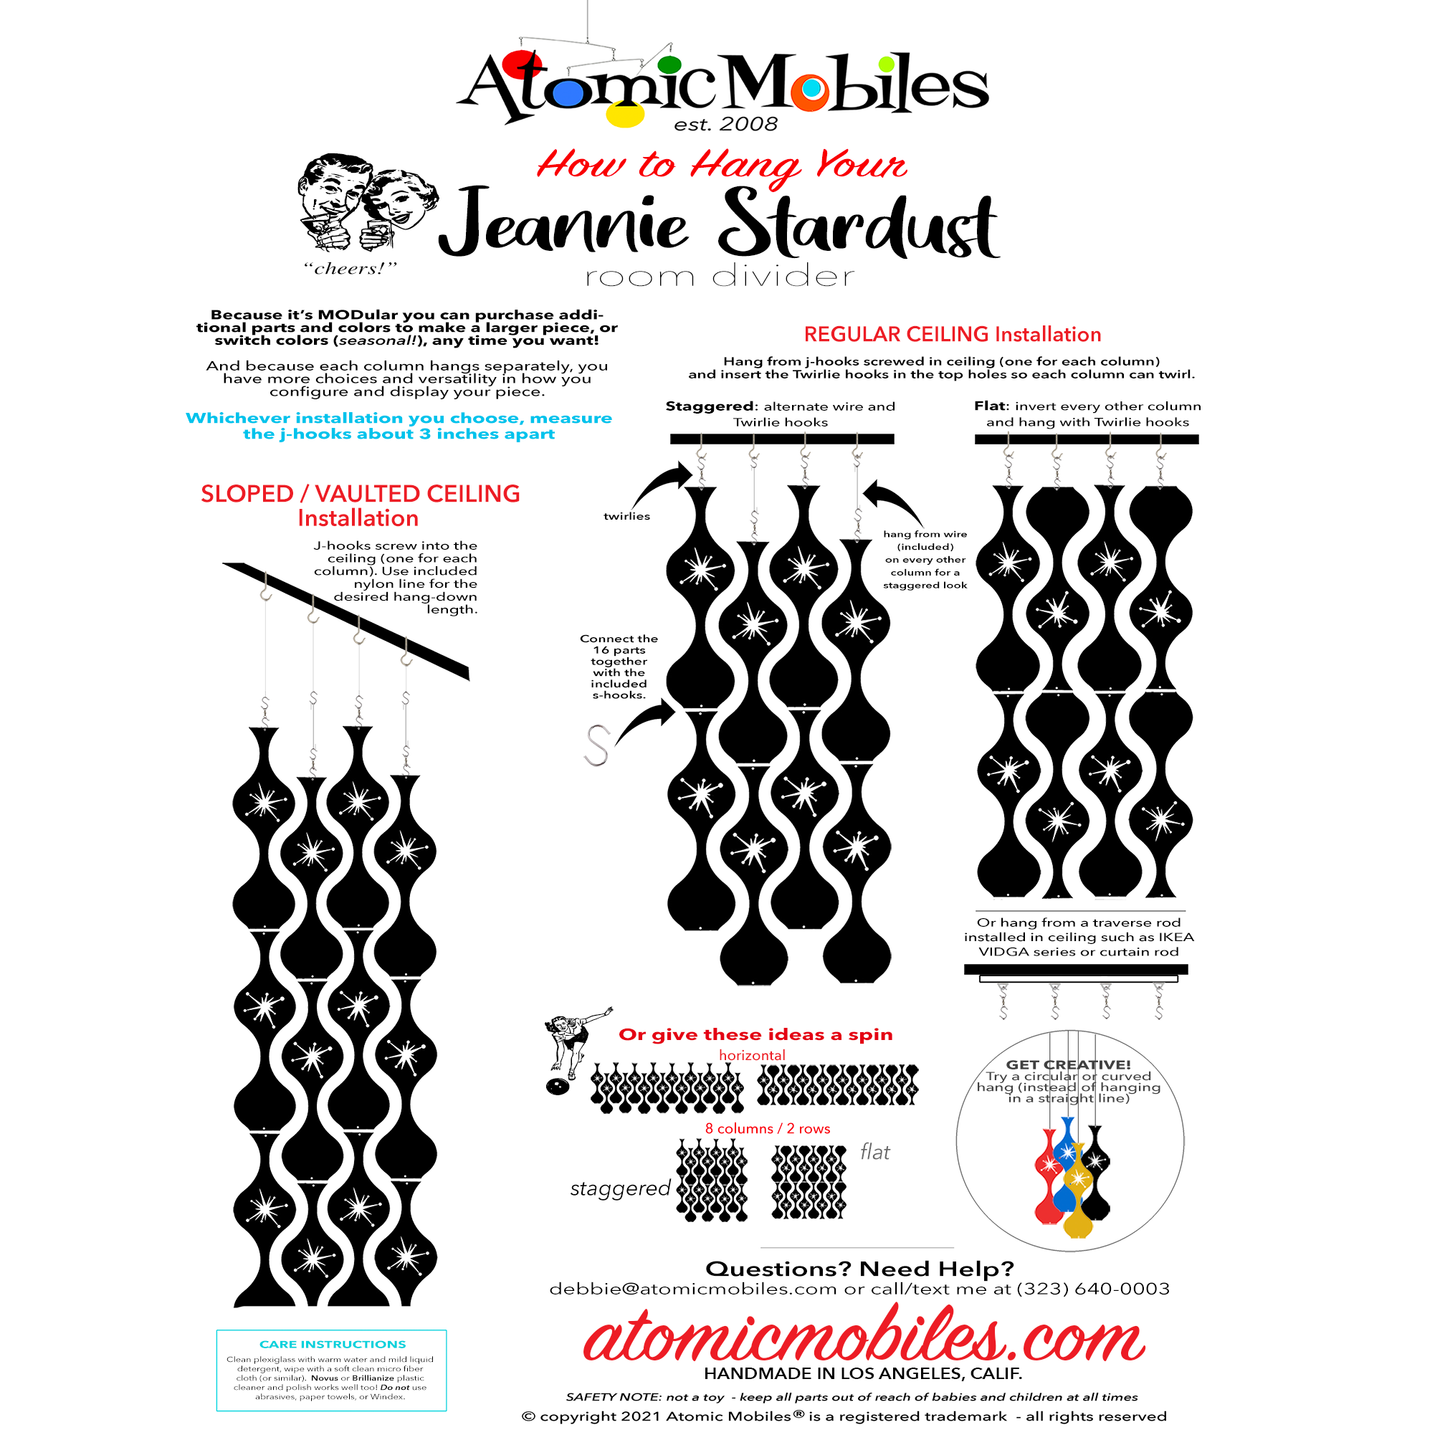 Hanging instructions for Jeannie Stardust Room Dividers in mid century modern style  by AtomicMobiles.com